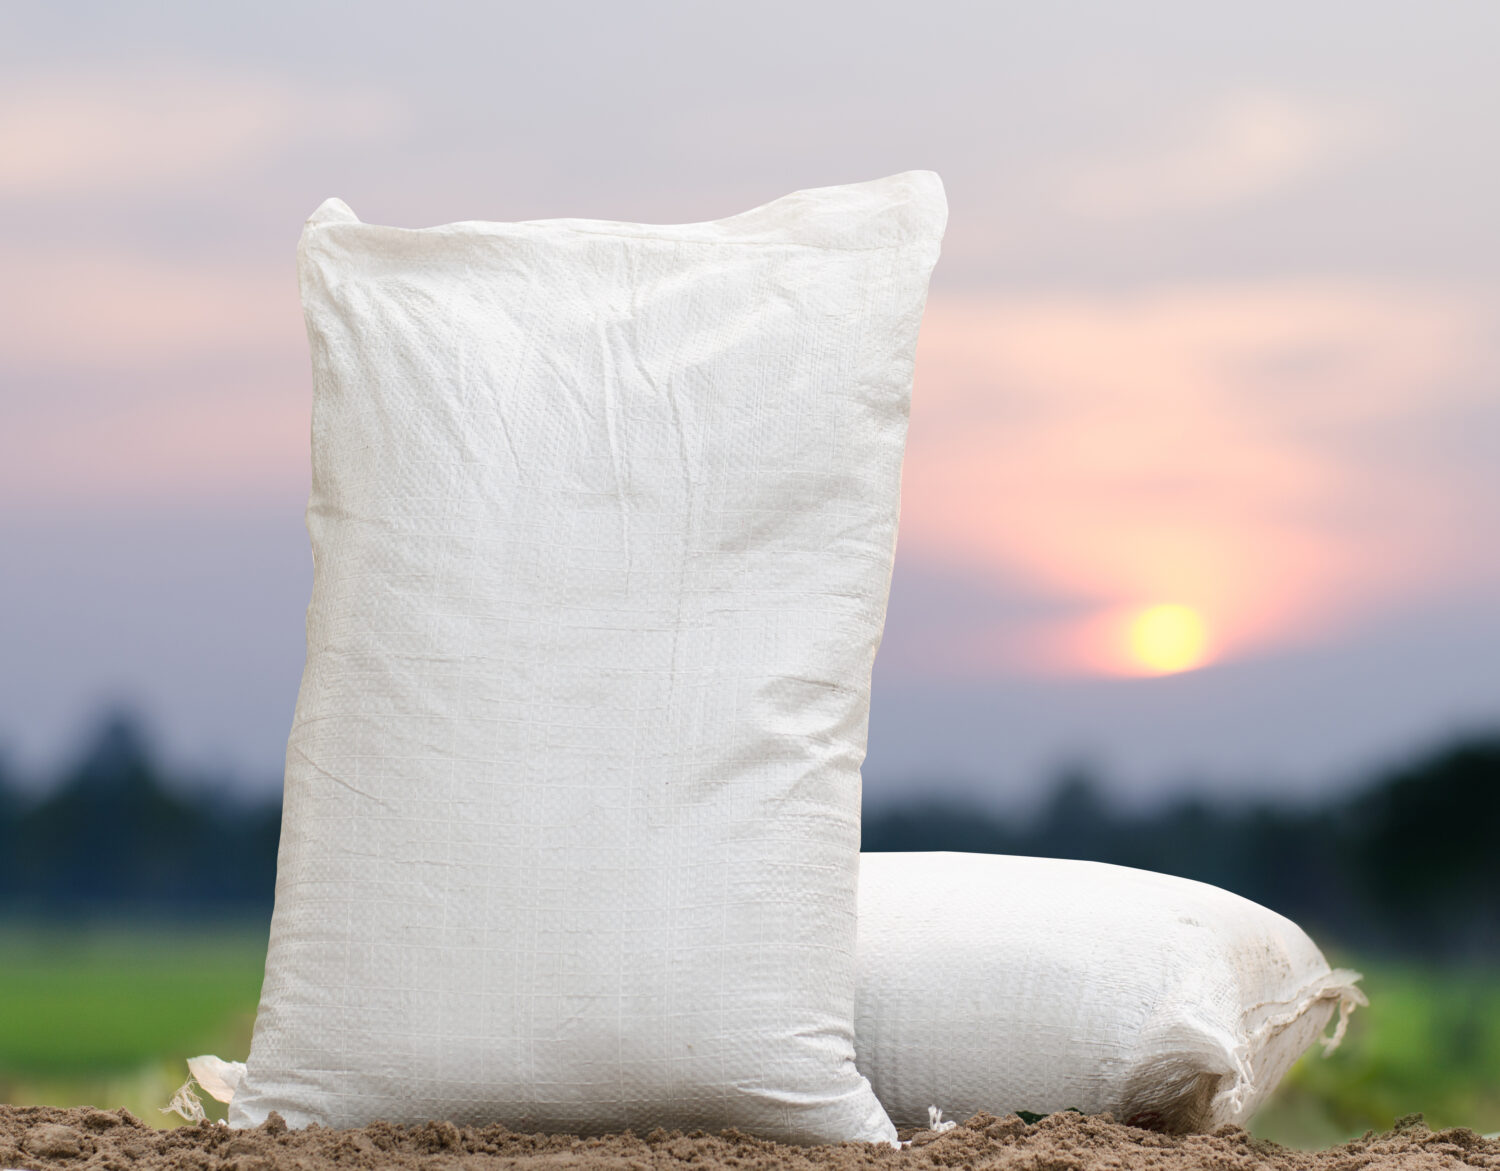 Small Silage Bags for Agriculture and Grain Bagging